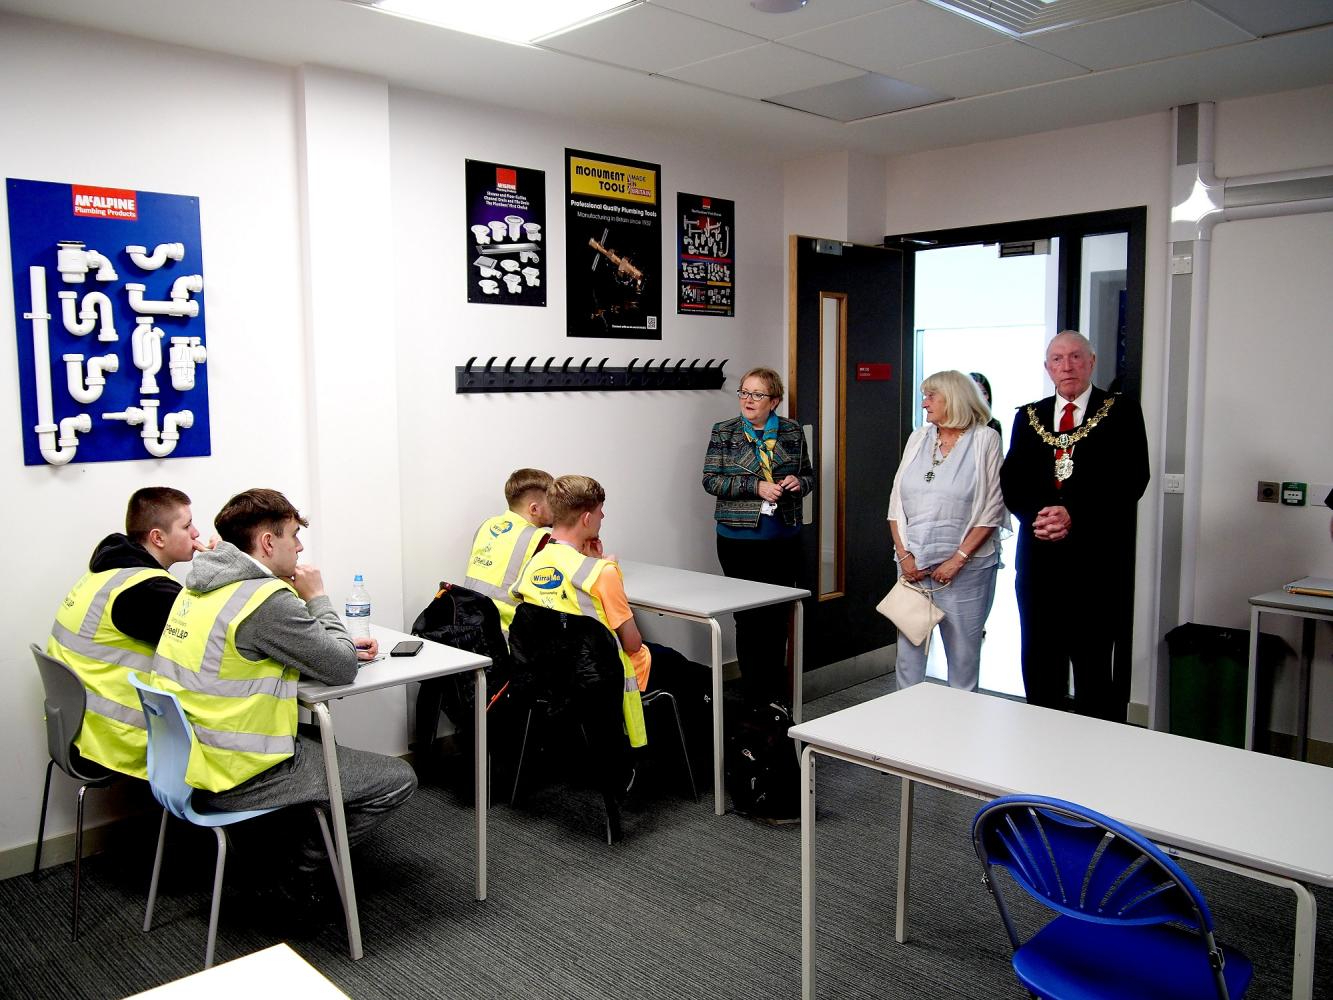 The visit included a tour of Wirral Waters construction campus